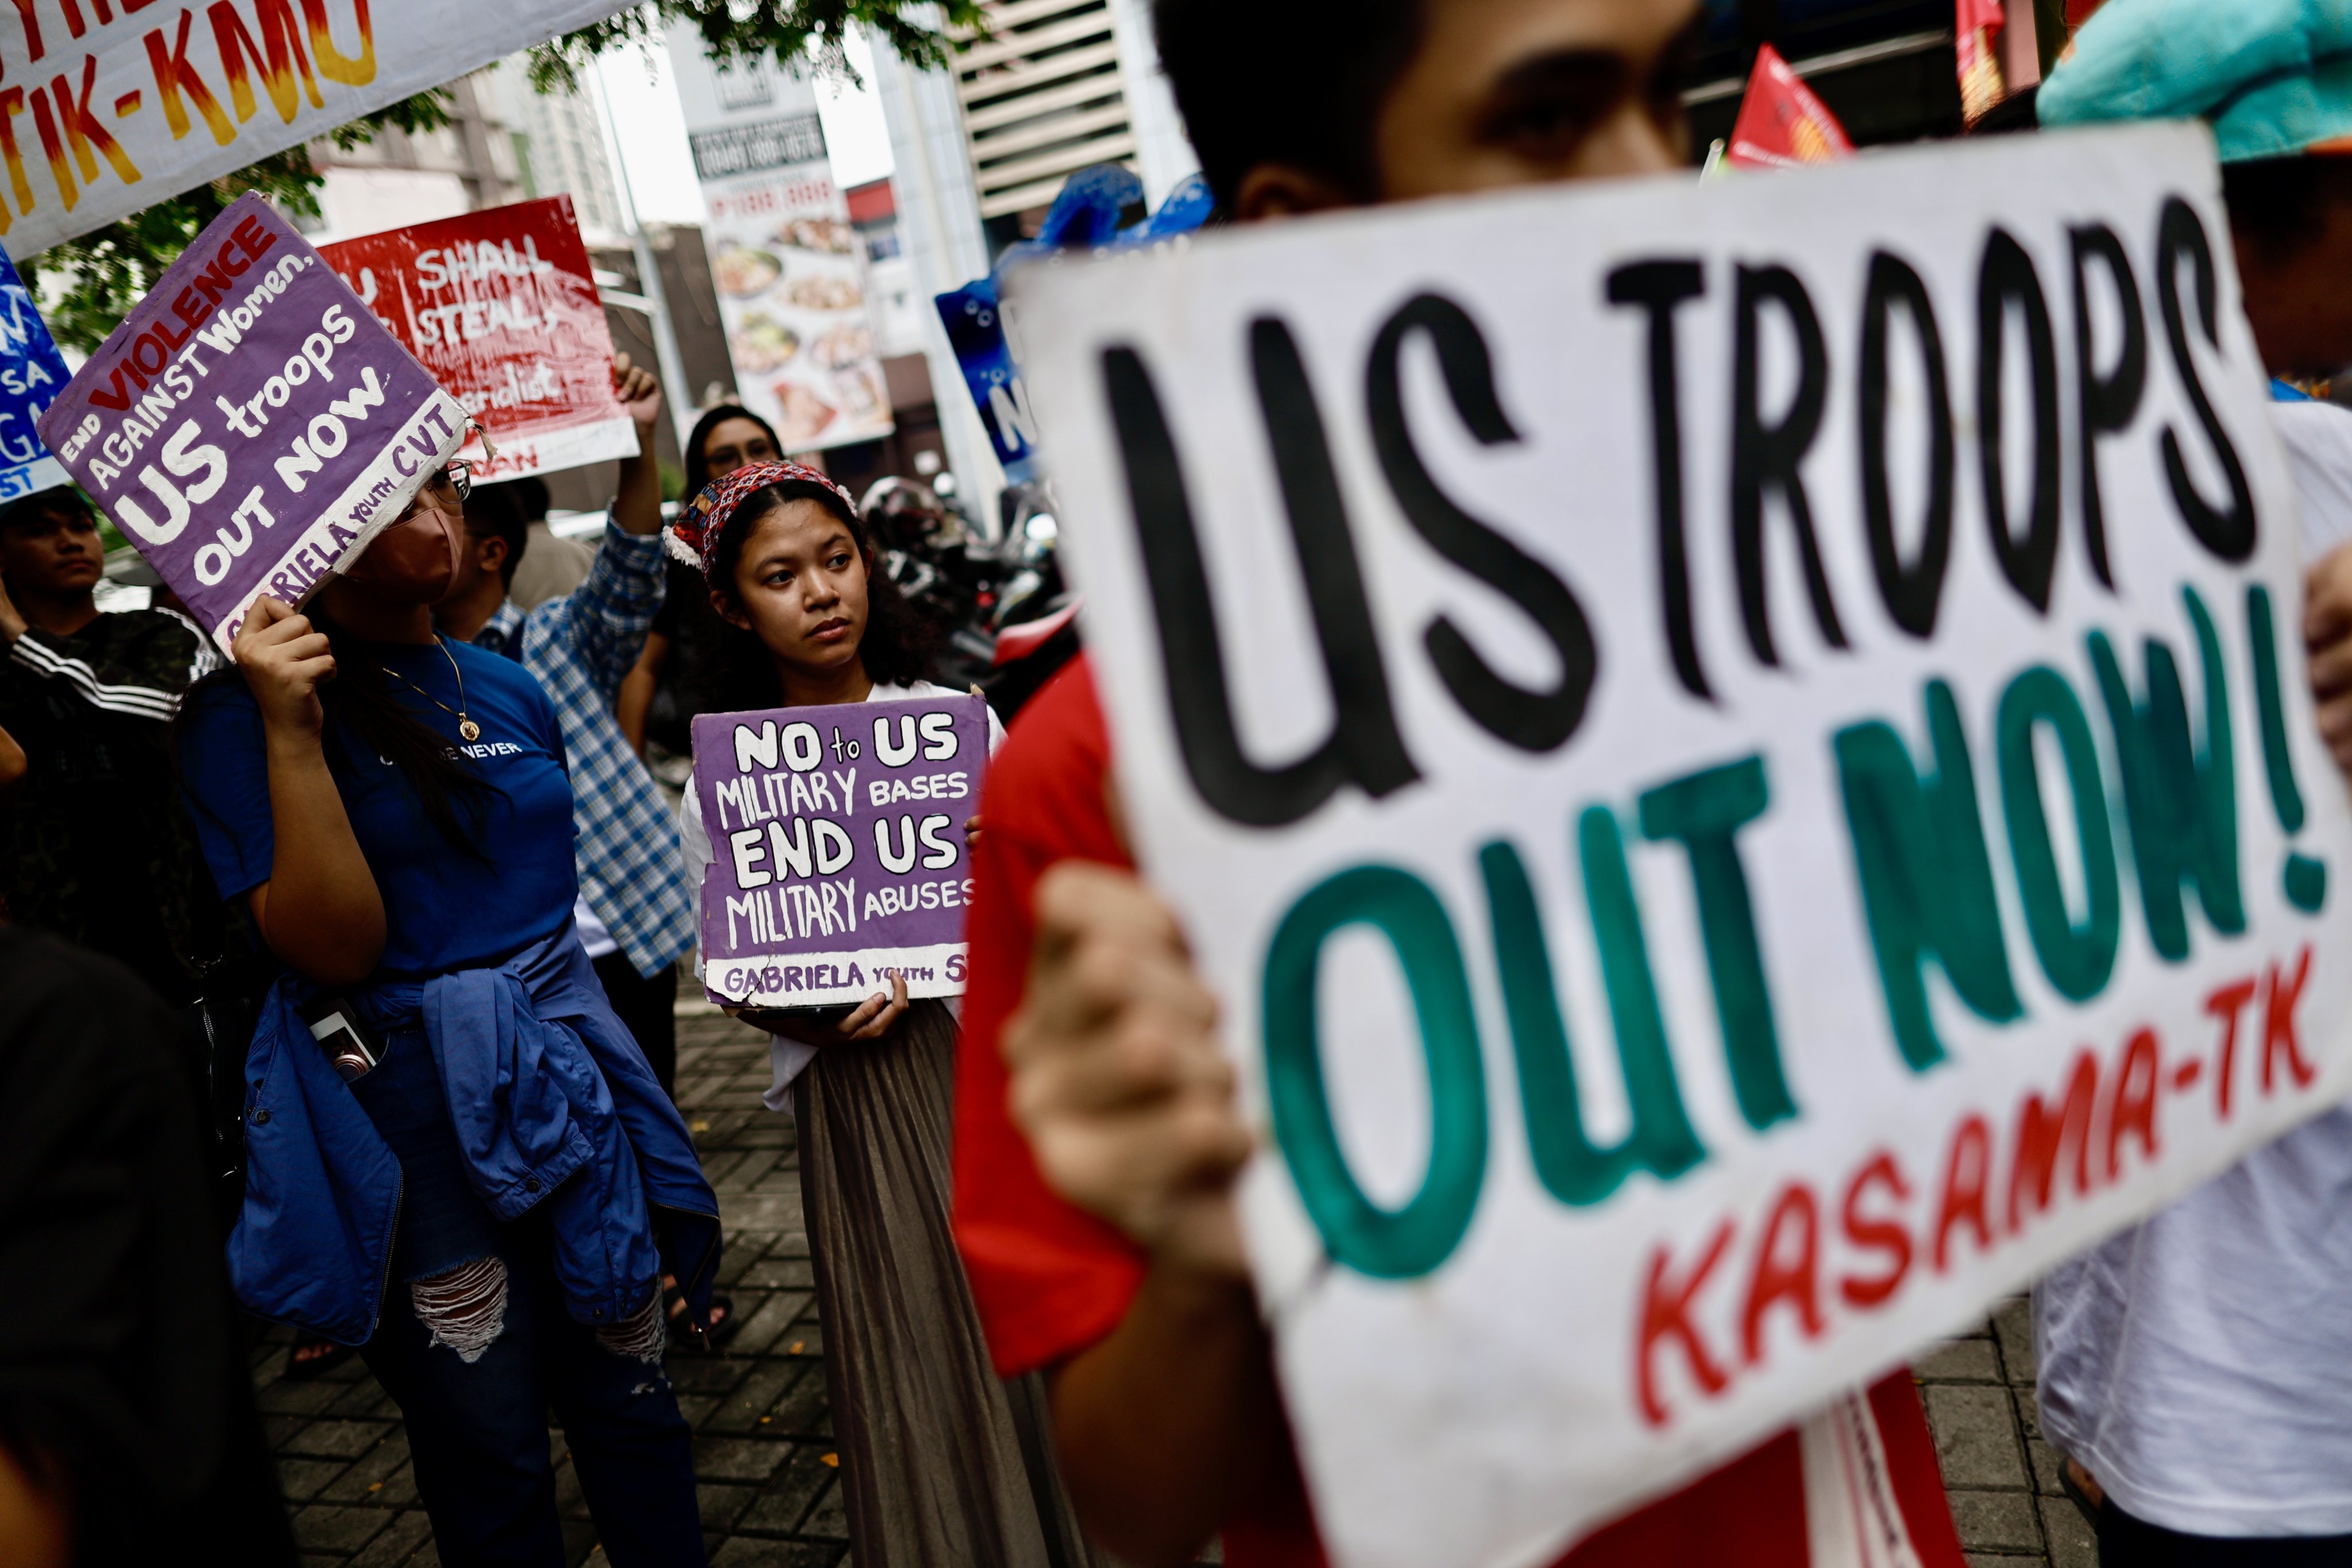 Protesters hold a rally in Manila on July 18 against the US military presence in the Philippines. Photo: EPA-EFE